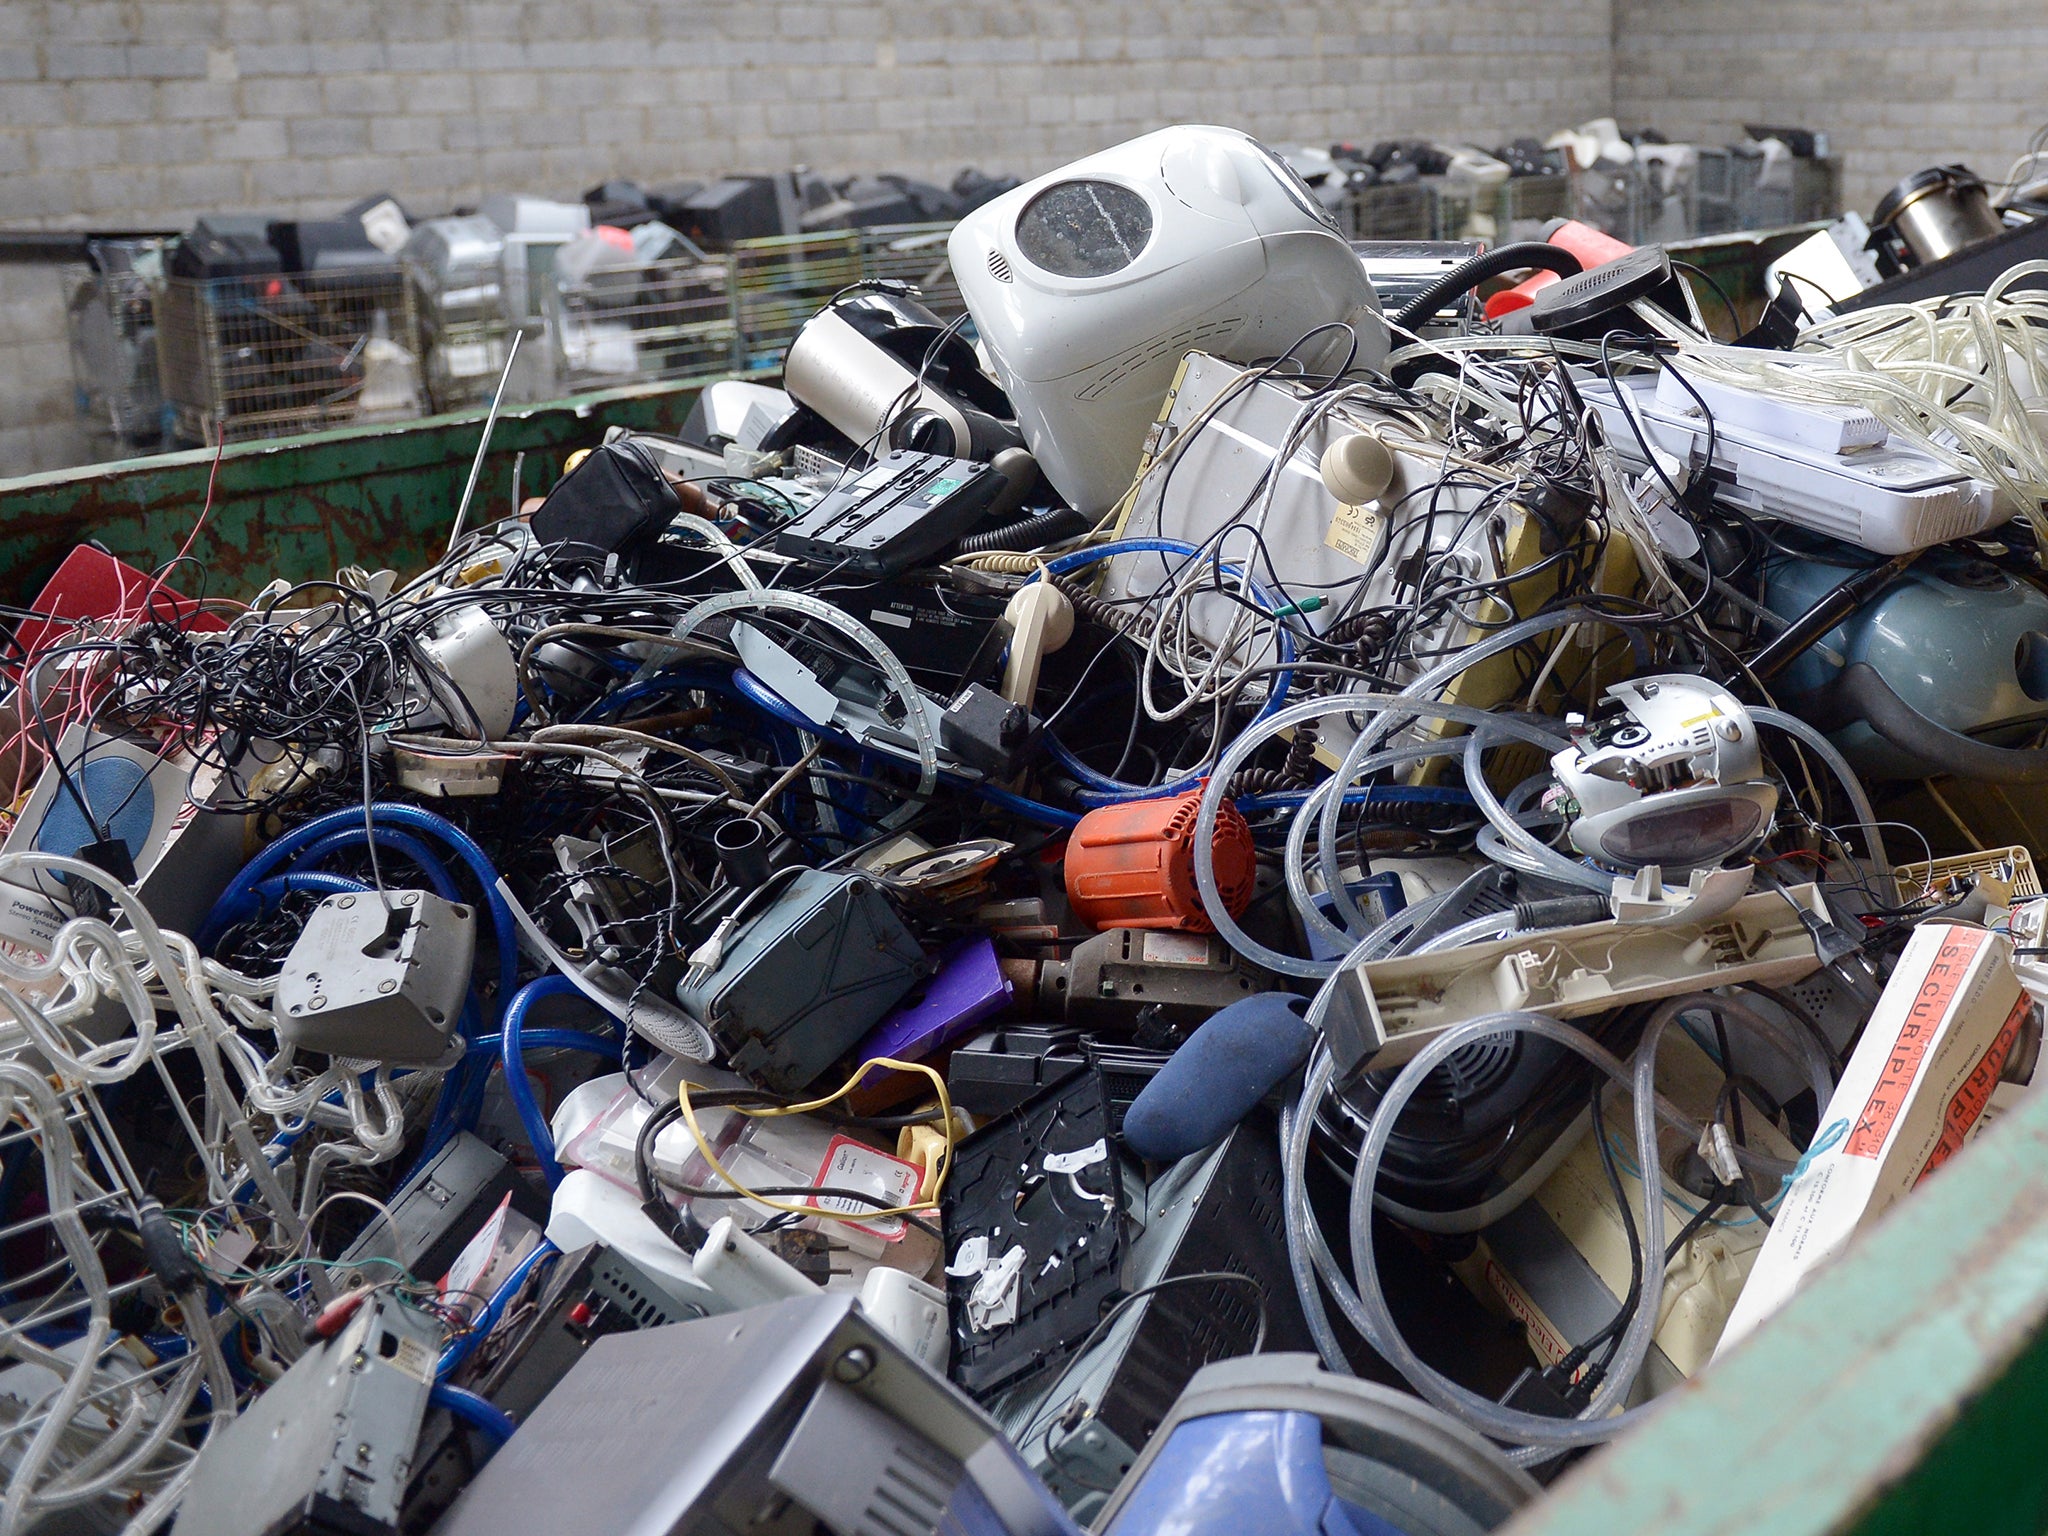 The UK is responsible for producing the second-highest amount of e-waste per person in the world